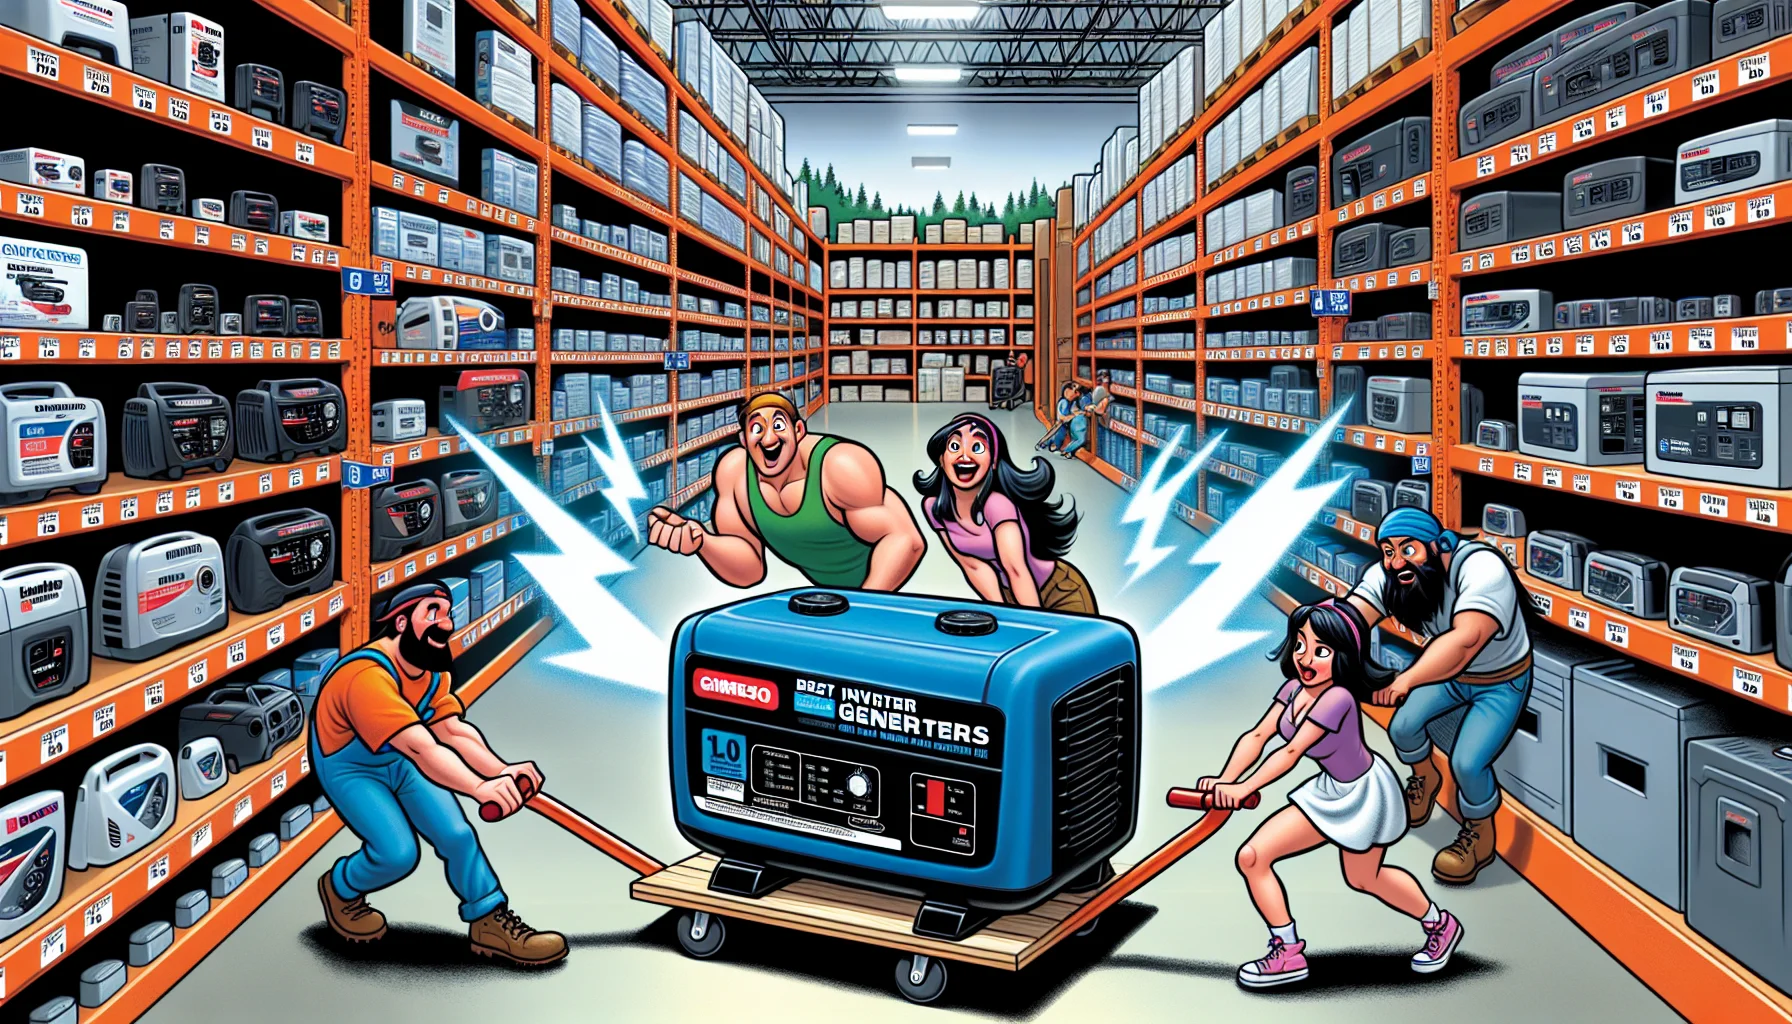 Visualize a humorous scene of a home improvement store aisle humorously labeled as 'Best Inverter Generators'. Arrange a few top models of inverter generators on the shelves. Then illustrate the character from a classic fairy tale, like a gender-balanced mix of Jack & Jill with a variety of ethnic backgrounds - Caucasian, Hispanic, Black, Middle-Eastern, and South Asian. They're trying to wheel out a massive, behemoth of an inverter generator. But this generator is absurdly large, comically dwarfing everything else in the store. Include laughing and having fun as they struggle to push this giant generator. Incorporate a bright, electric blue bolt of lightning soaring out from the top, symbolizing the high power generated by these generators.